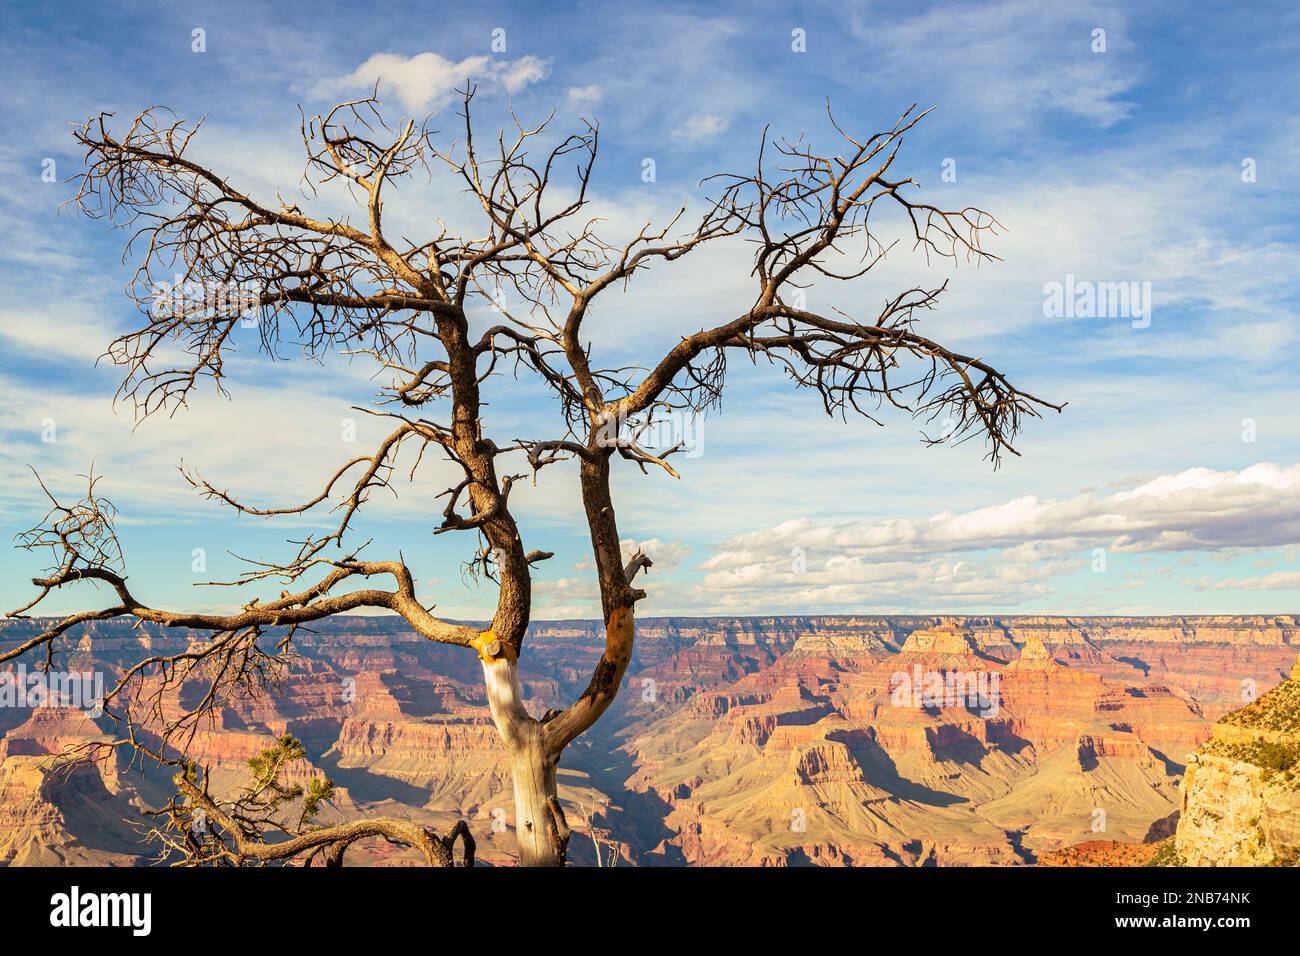 Grand Canyon in Arizona, USA. Skyline of Grand Canyon National Park. Panorama in beautiful nature landscape scenery at sunset in Grand Canyon National Park. Stock Photo